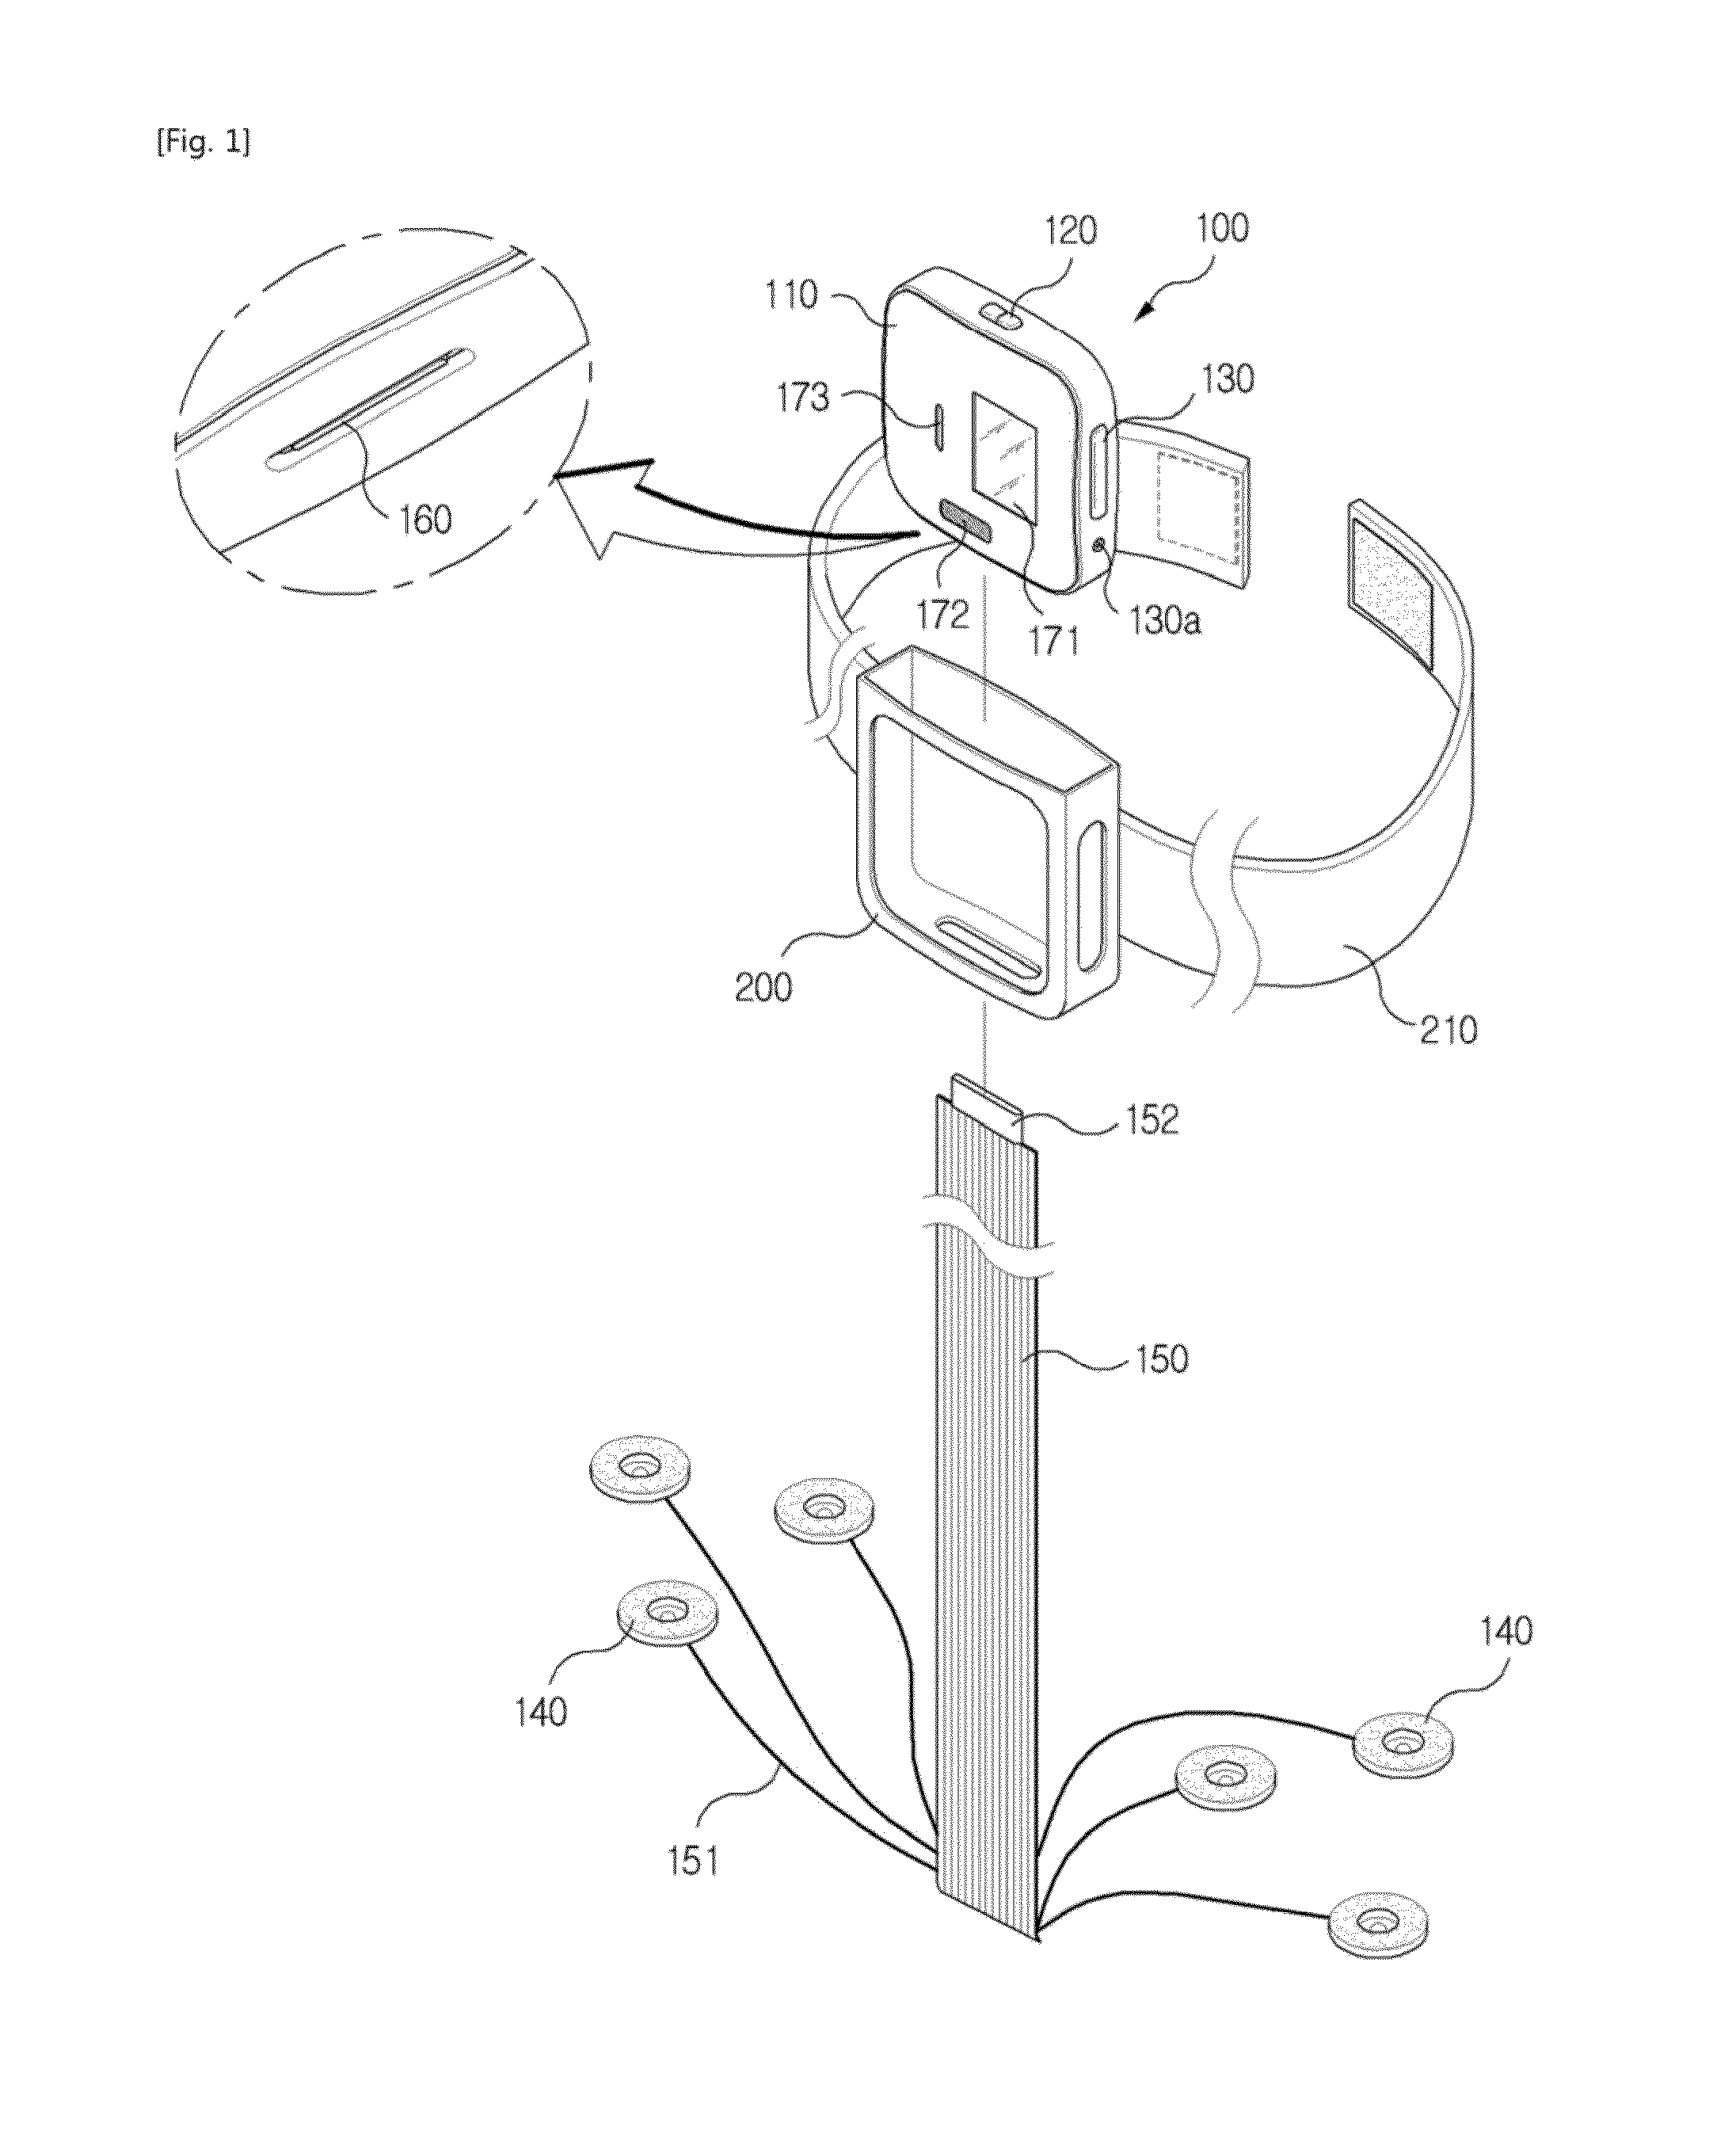 Therapy device for edema and neuropathy